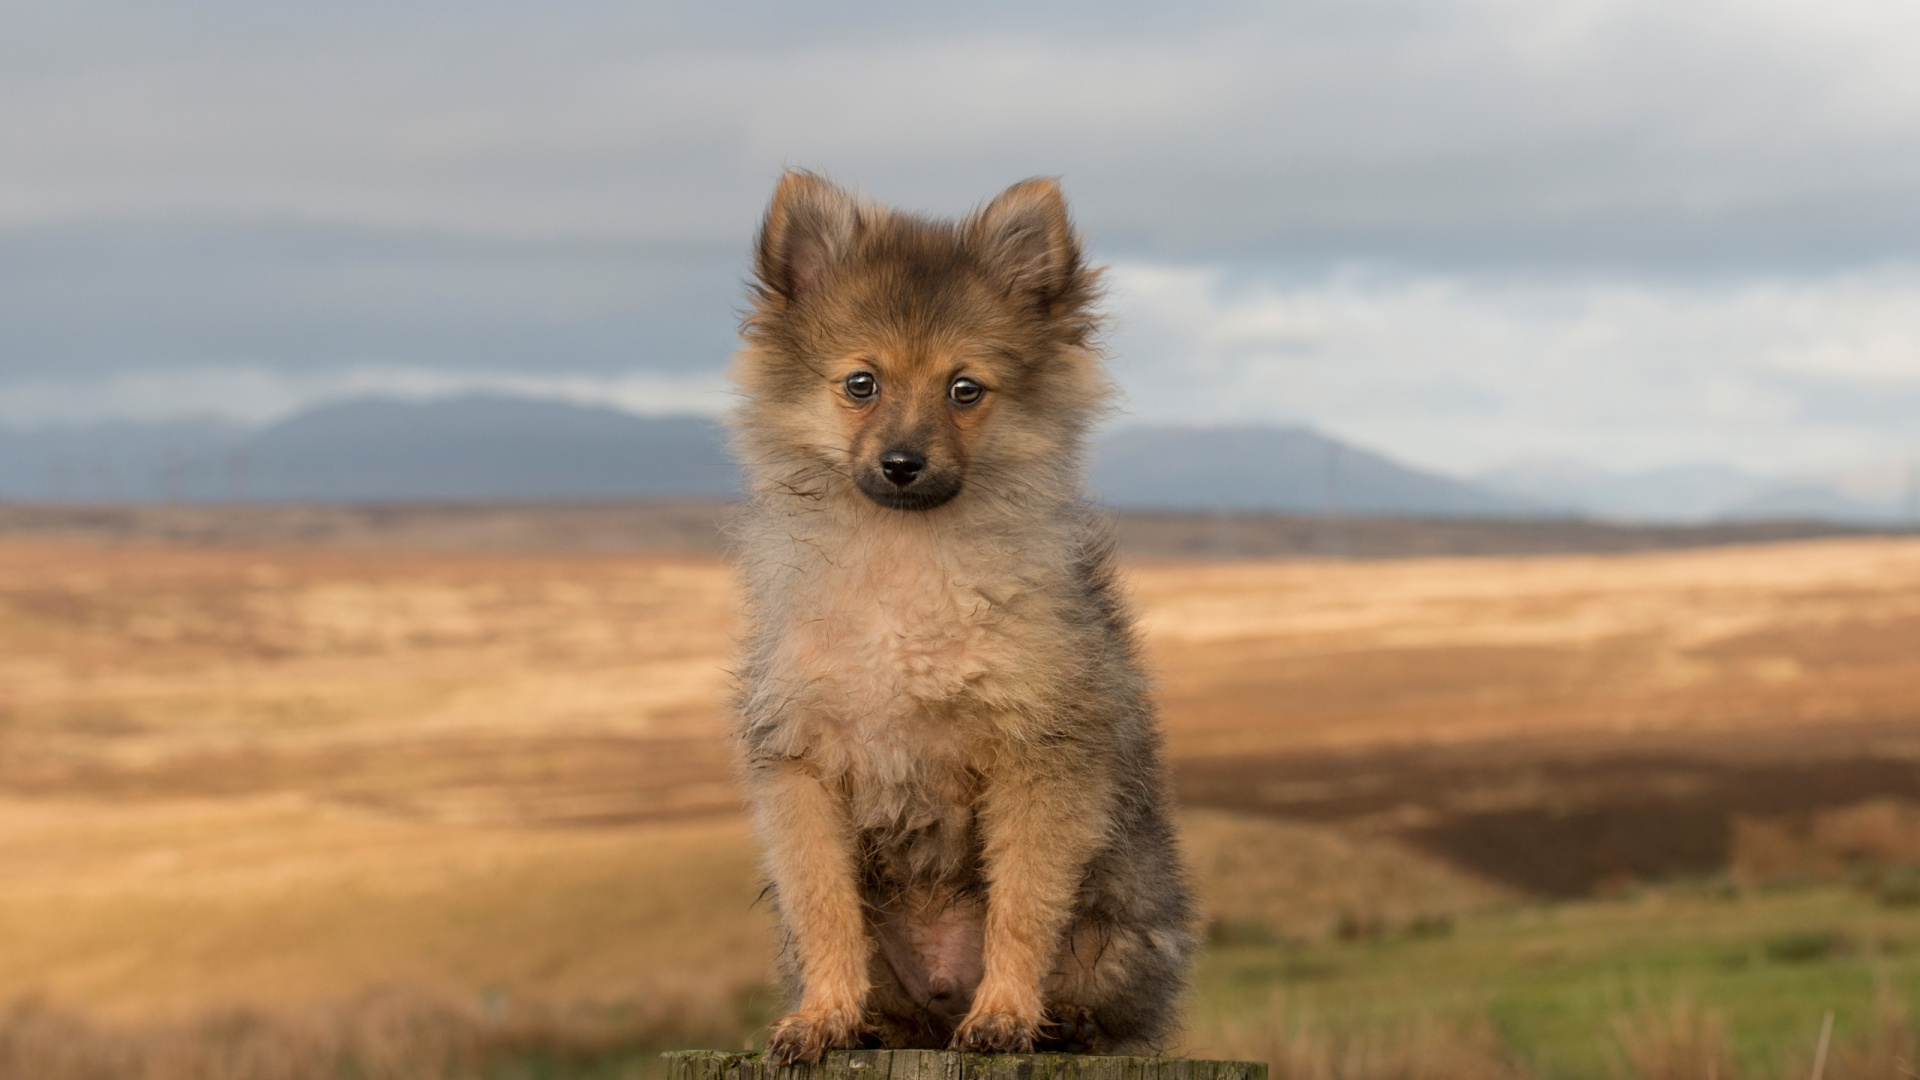 Brown and Black Pomeranian Puppy on Brown Field During Daytime. Wallpaper in 1920x1080 Resolution